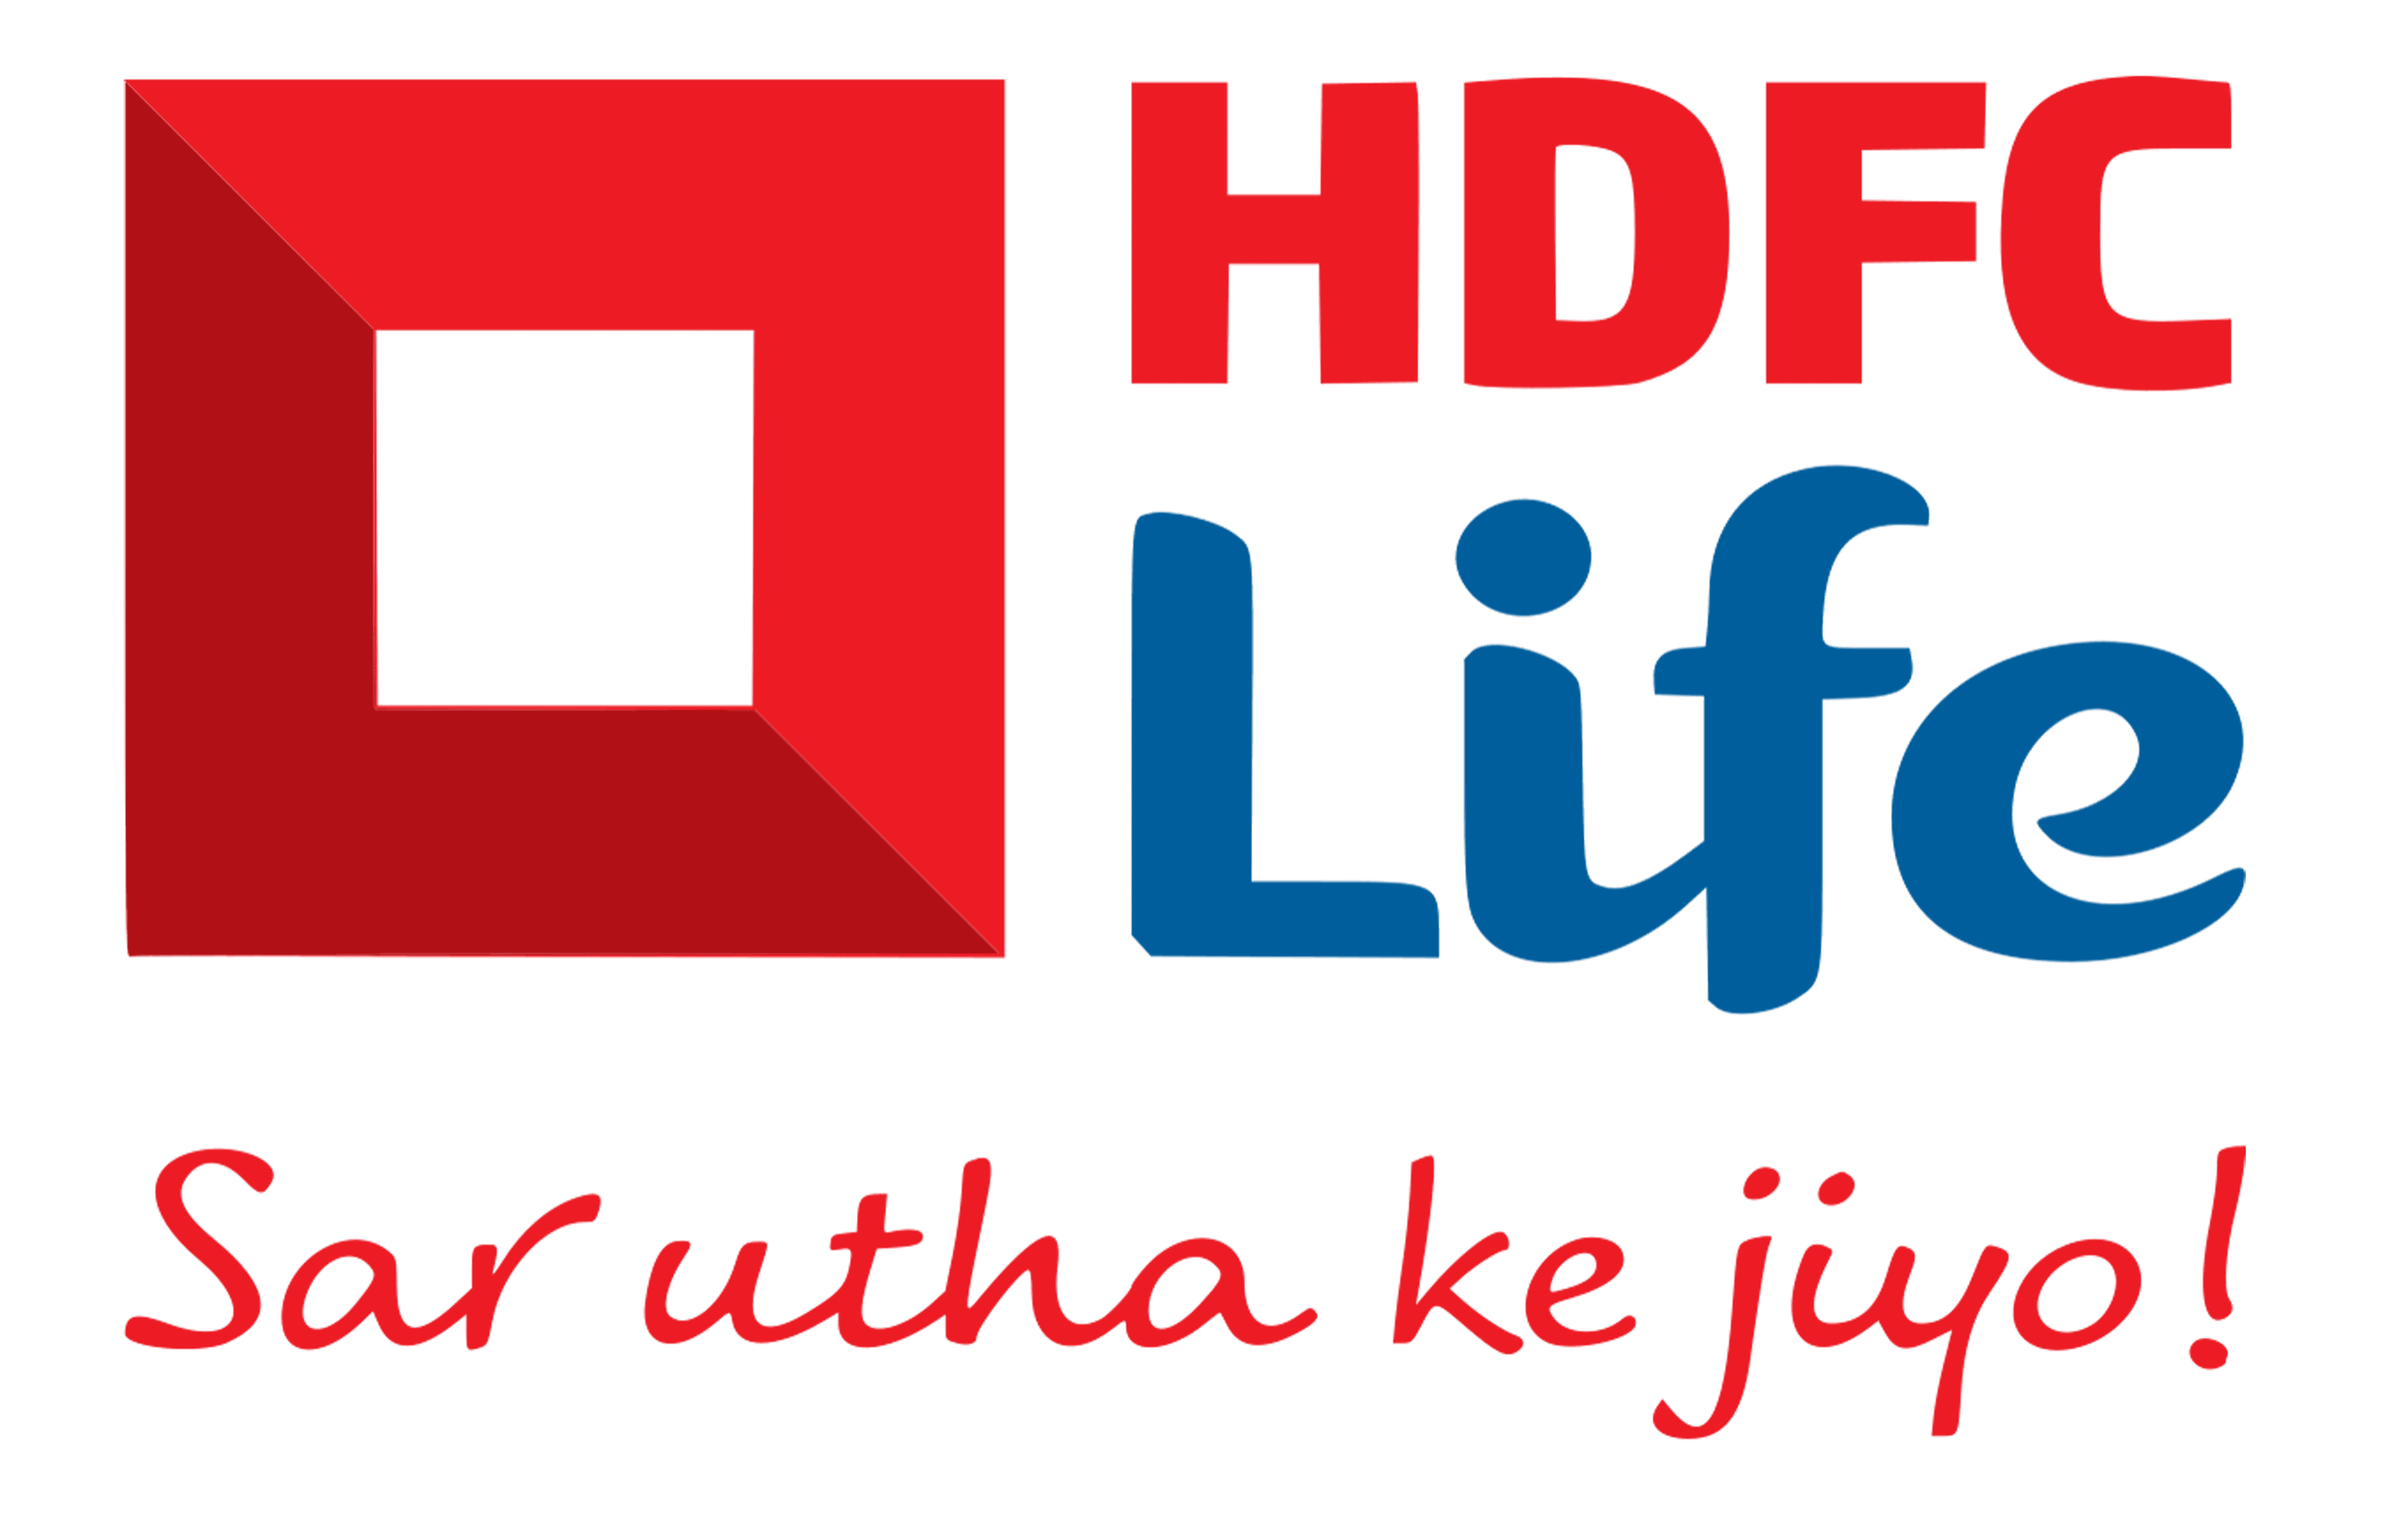 Guidelines by HDFC bank for debit card users